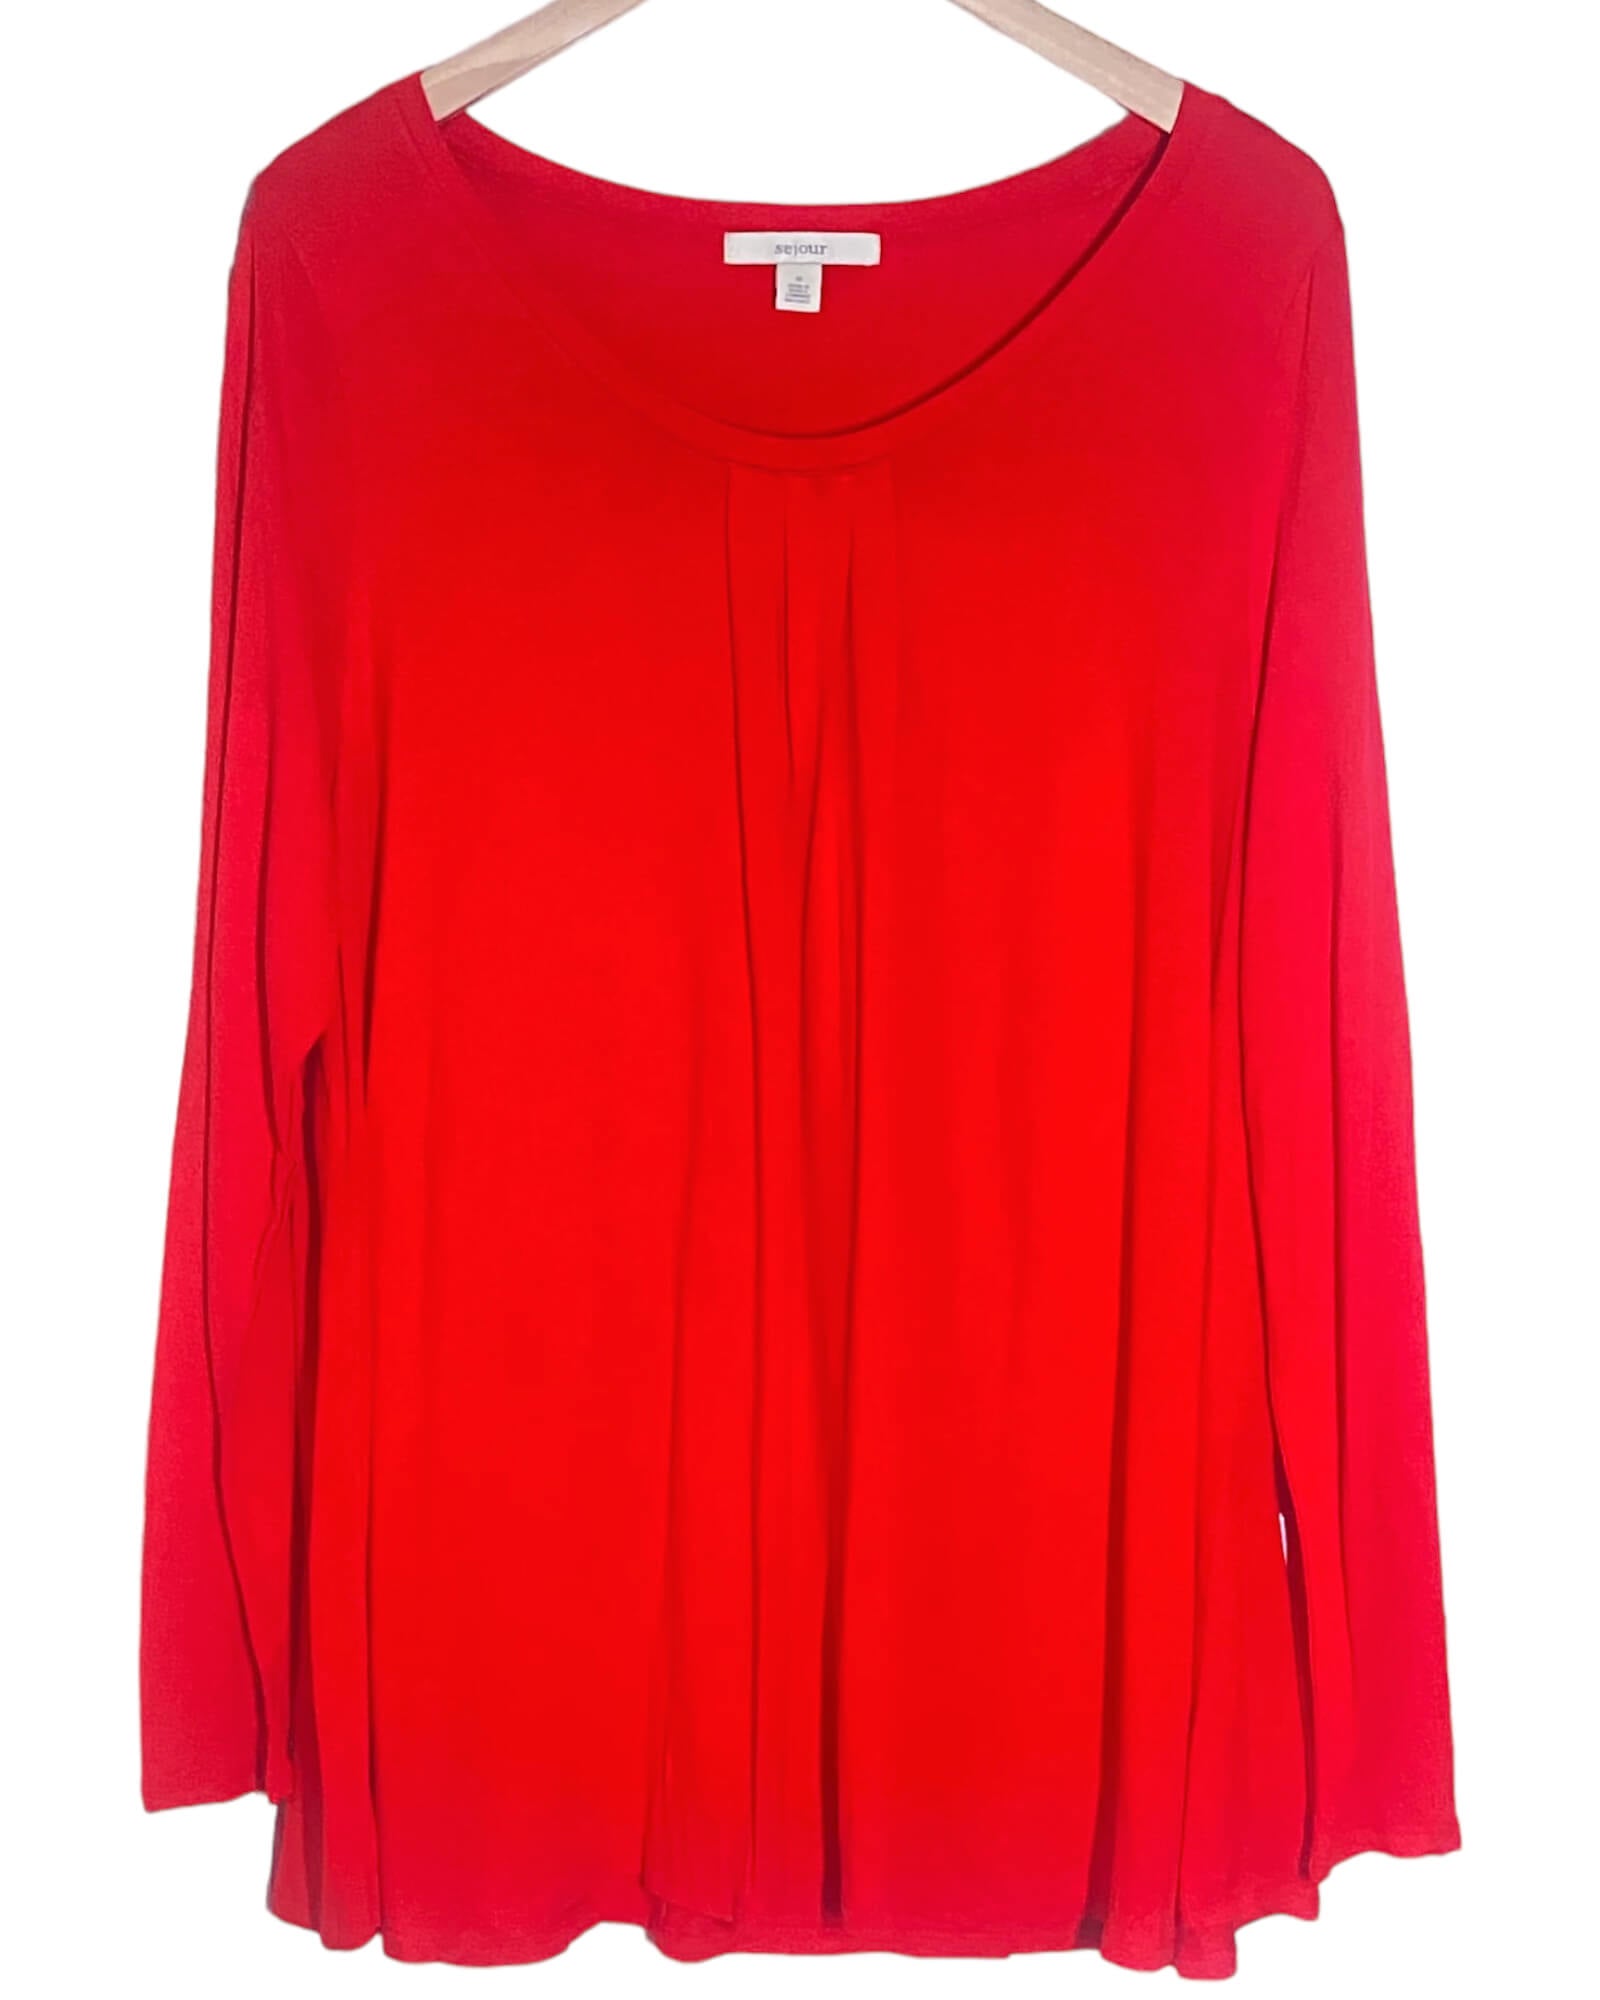 Bright Spring SEJOUR red long sleeve knit top pleats